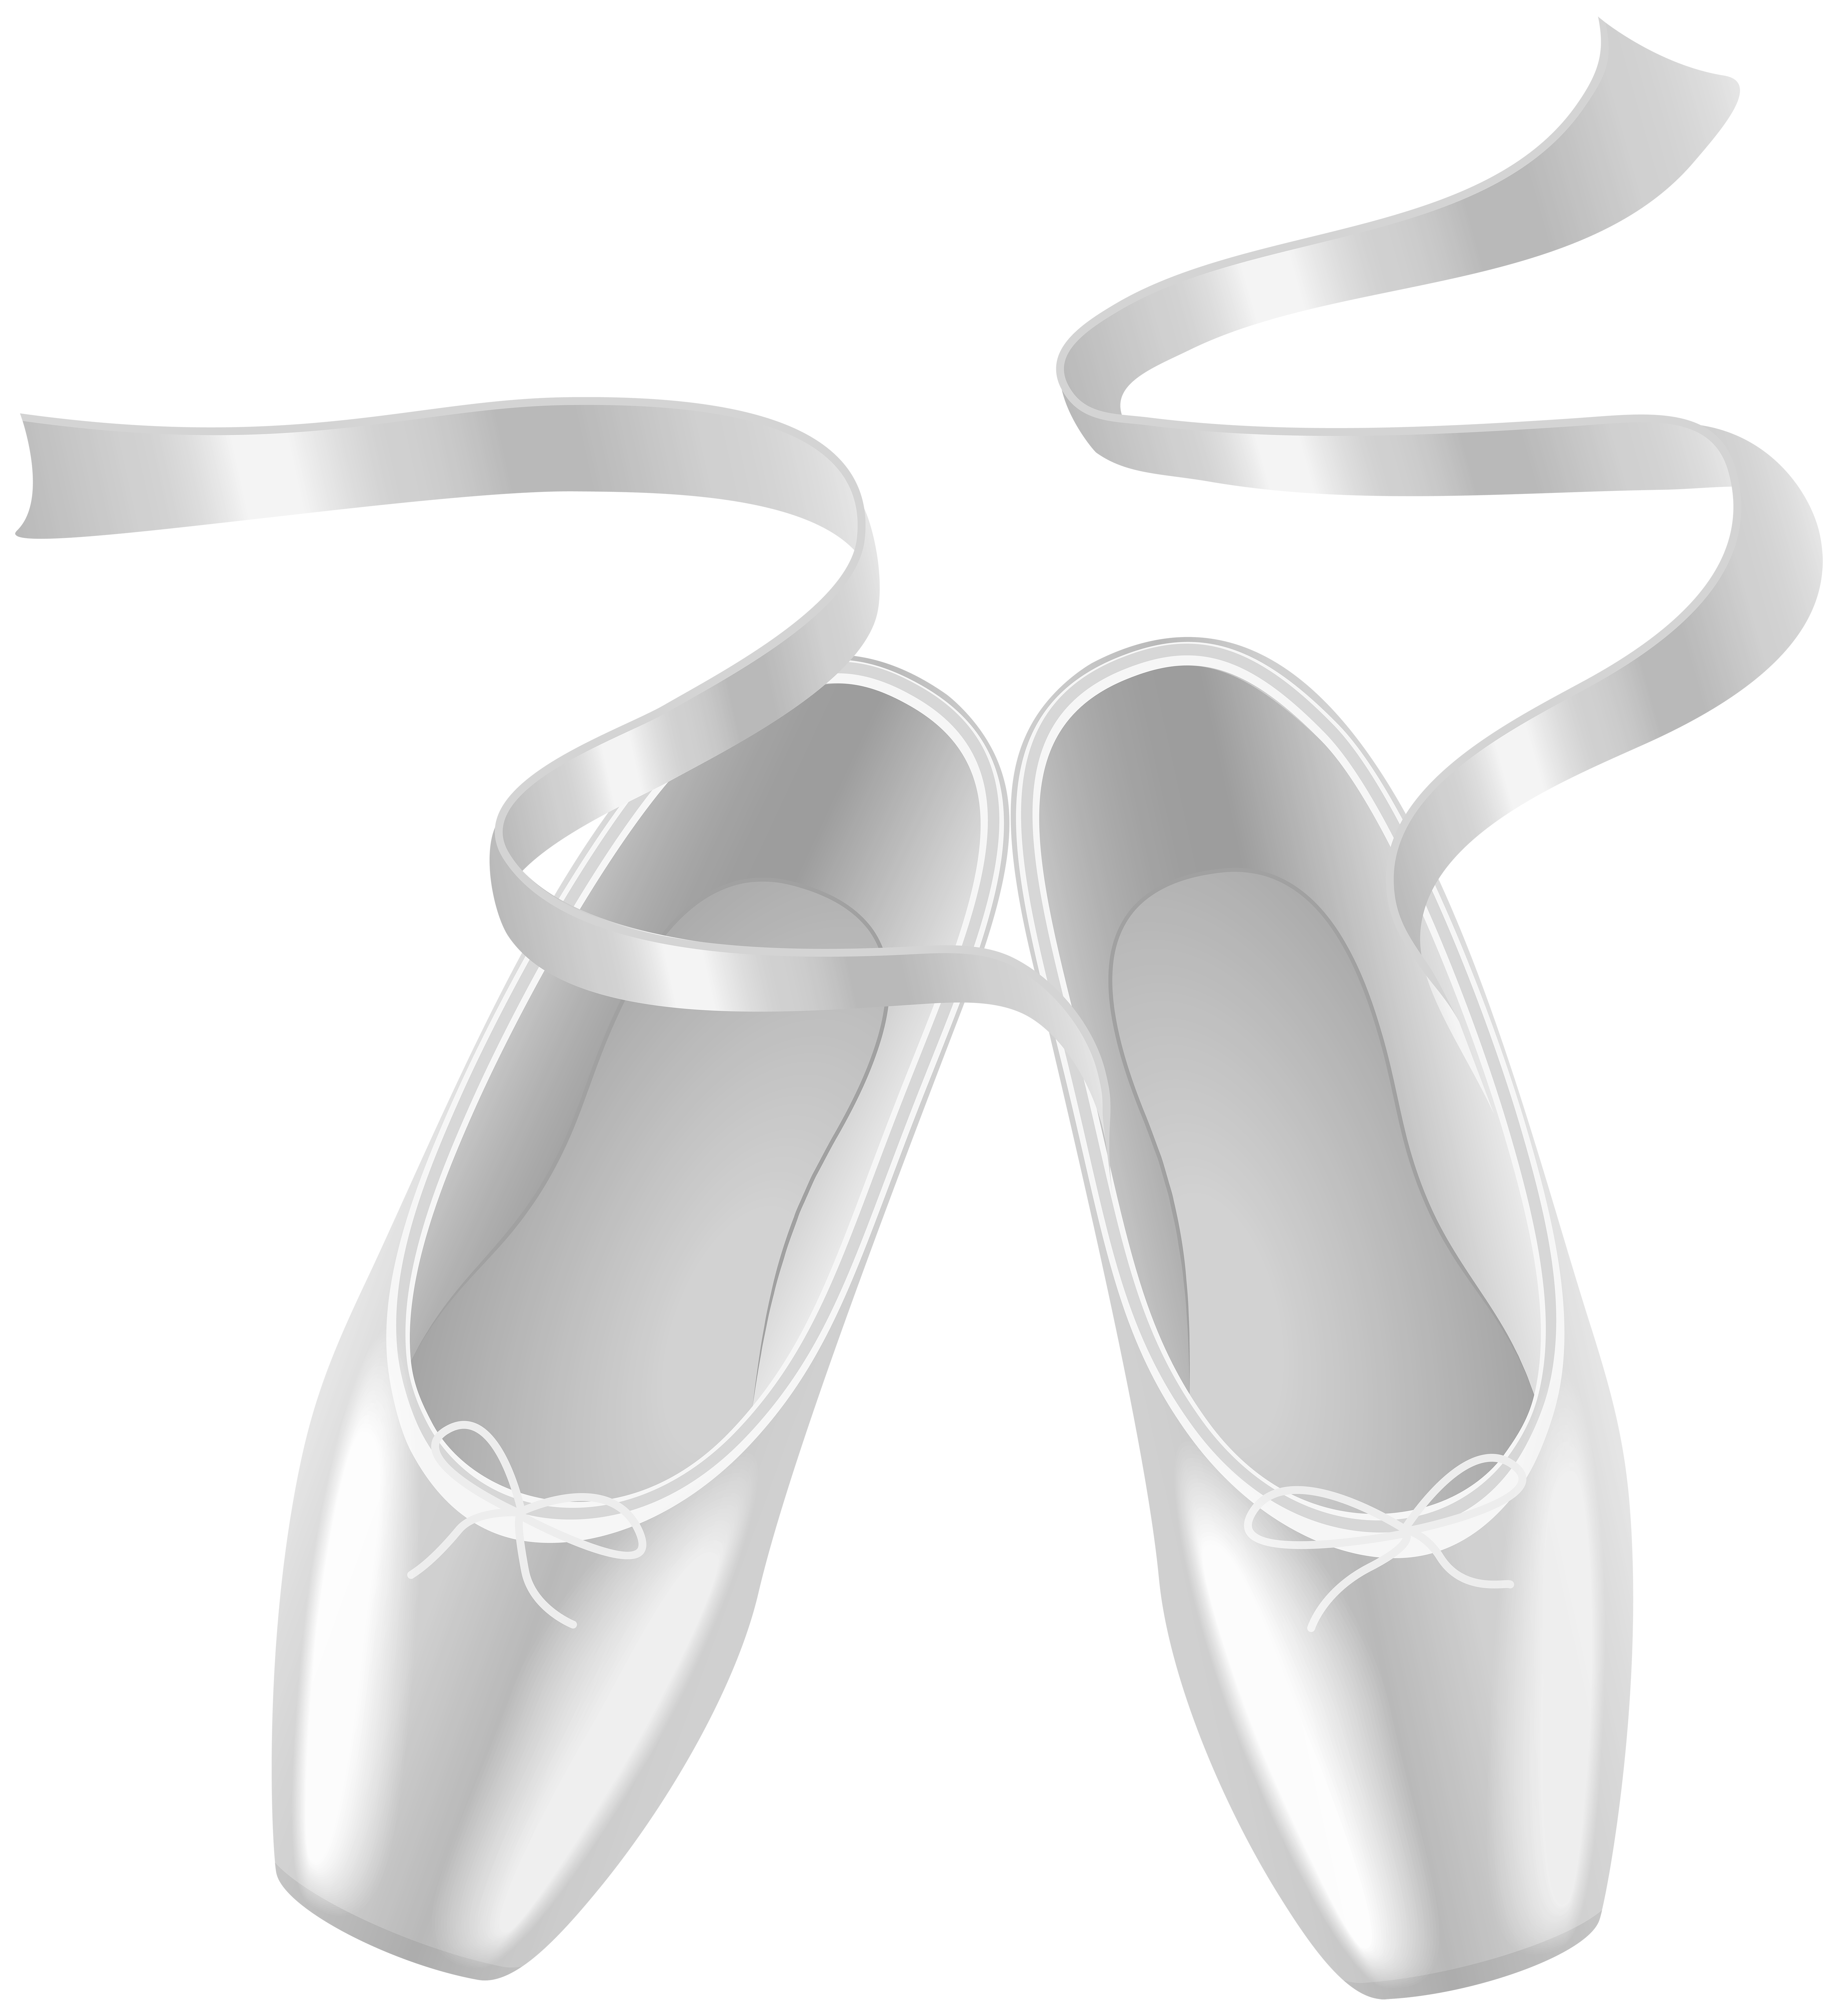 hanging pointe shoes clip art